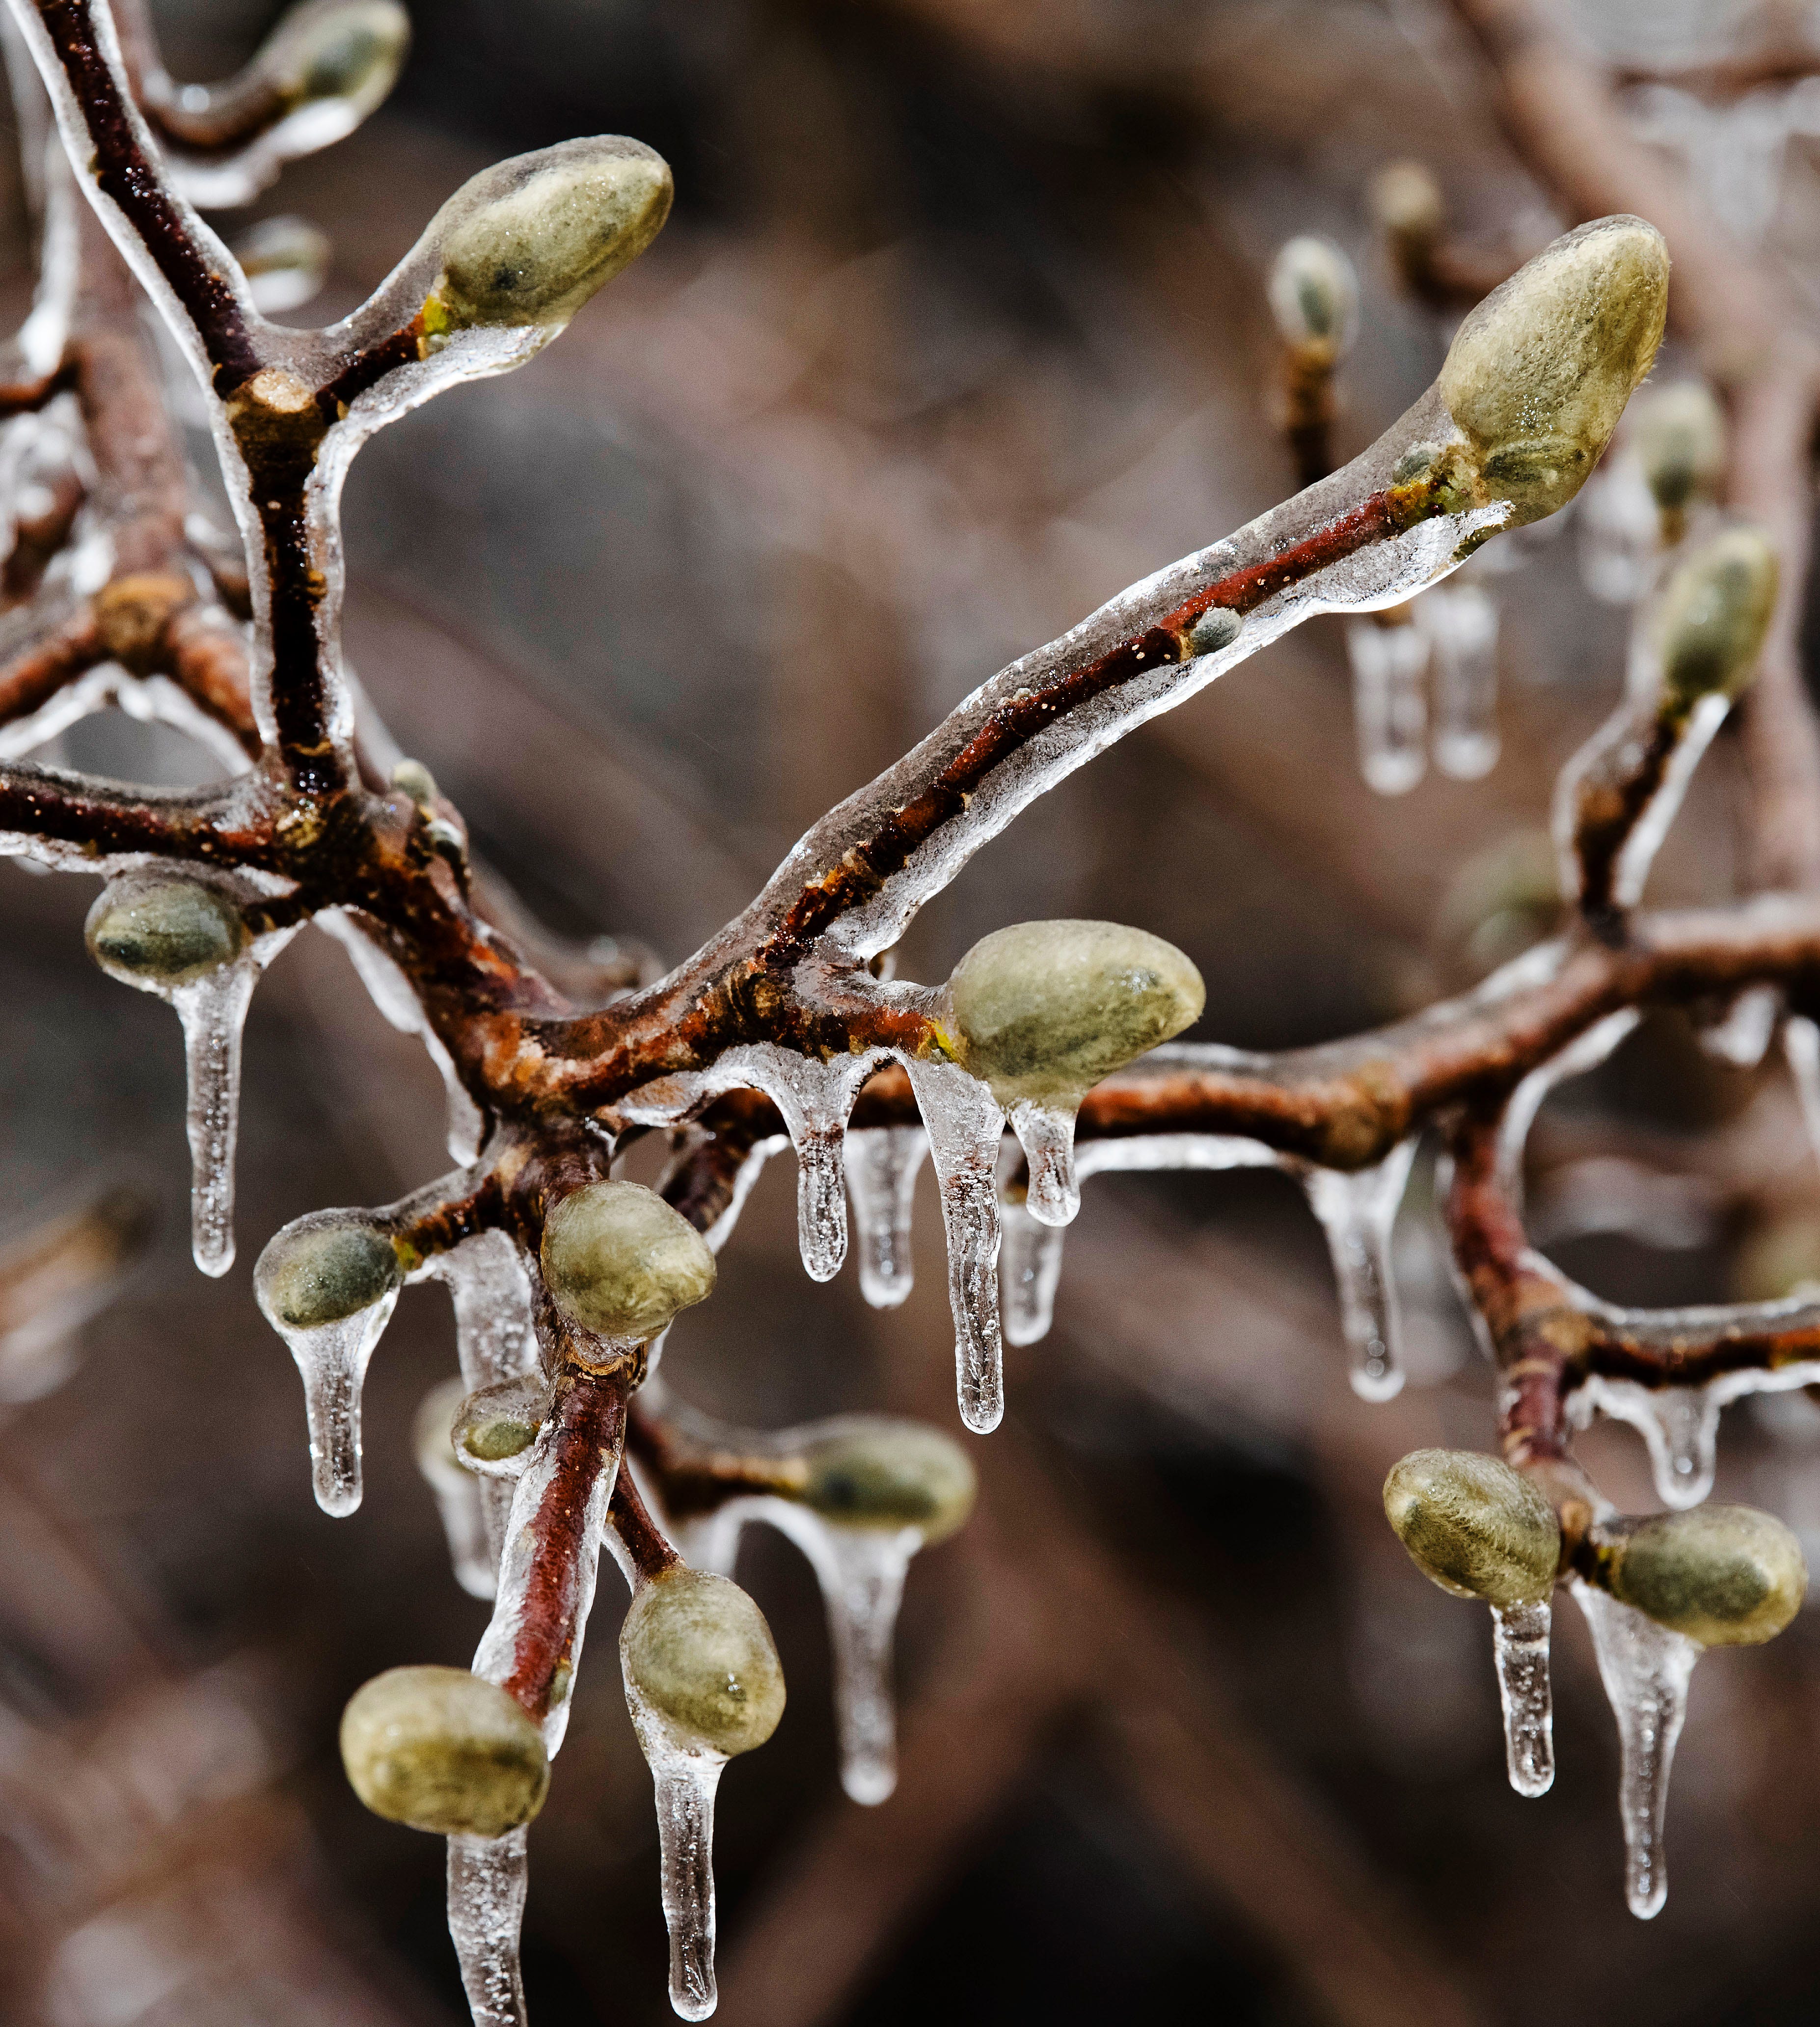 Ice encapsulates the emerging buds on tree branches in Grosse Pointe Woods on the morning of Thursday, February 23, 2023 after freezing rain coated Metro Detroit communities over night.